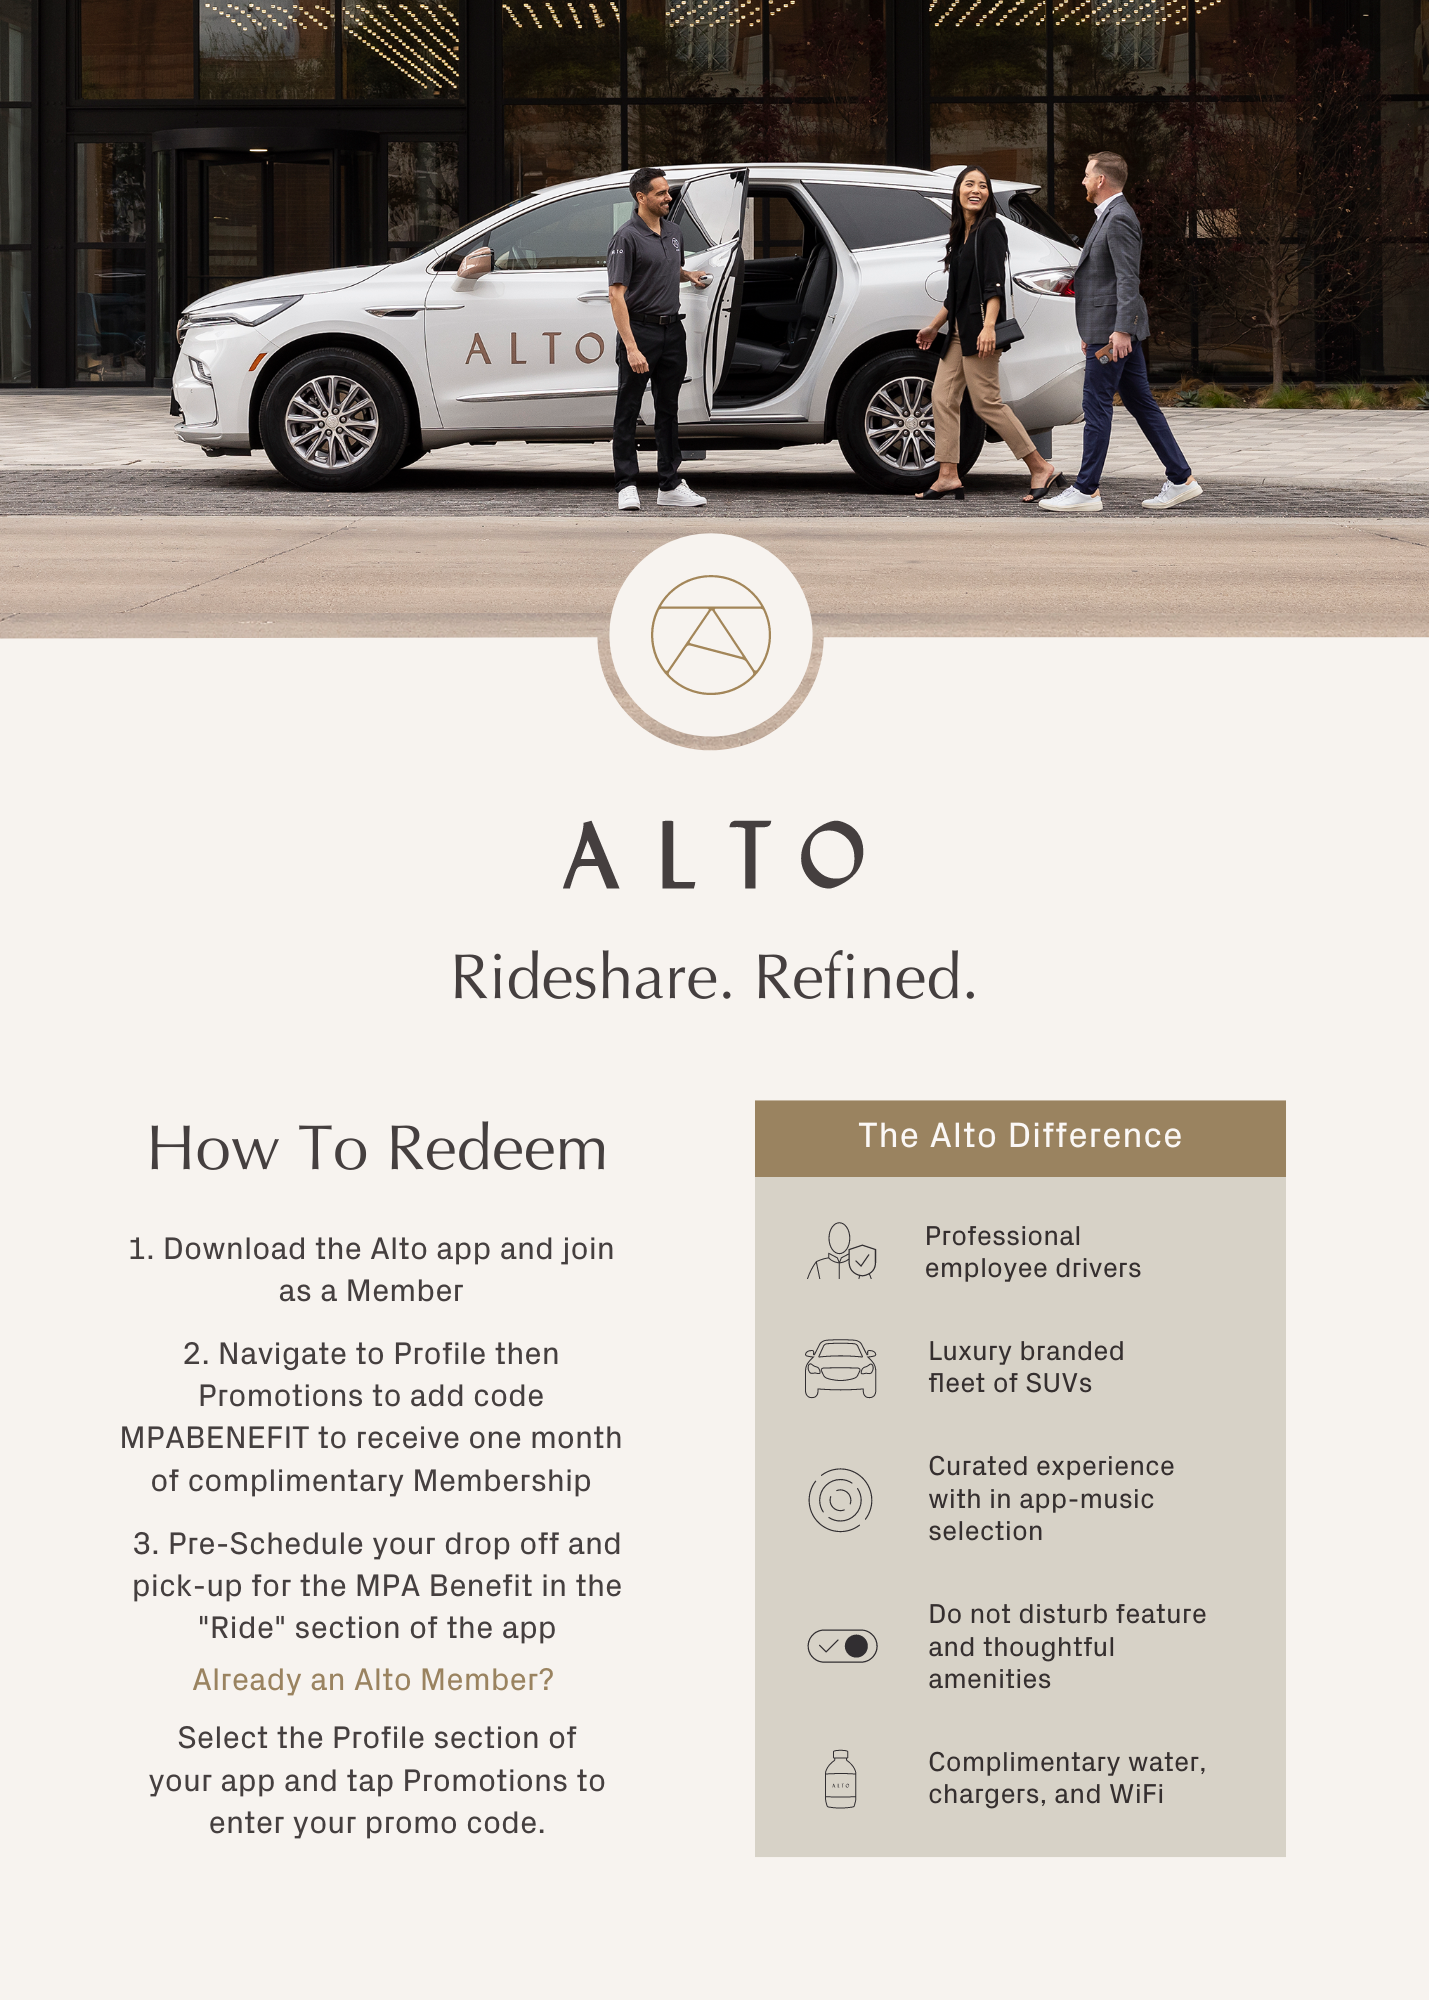 Rideshare Refined: How Alto Is Upgrading The Rideshare Driver Experience